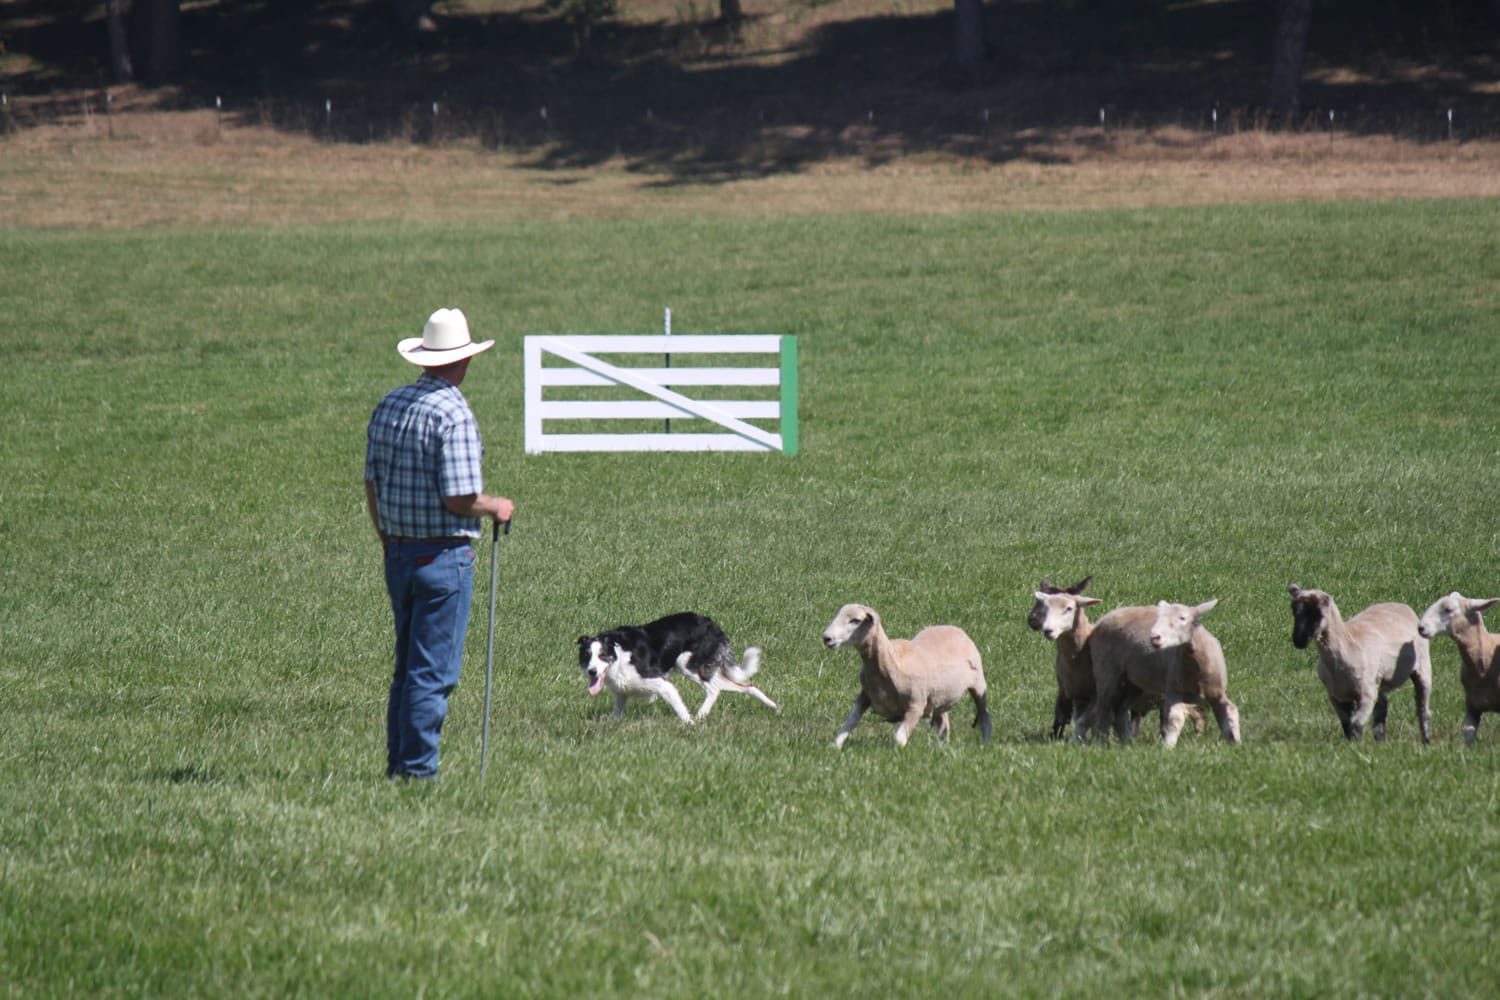 Post-Record file photo
Border collie Rex and her handler Rob Miller attempt to herd a group of sheep during the Lacamas Valley Sheepdog Trial, held at the Johnston Dairy Farm in Camas.